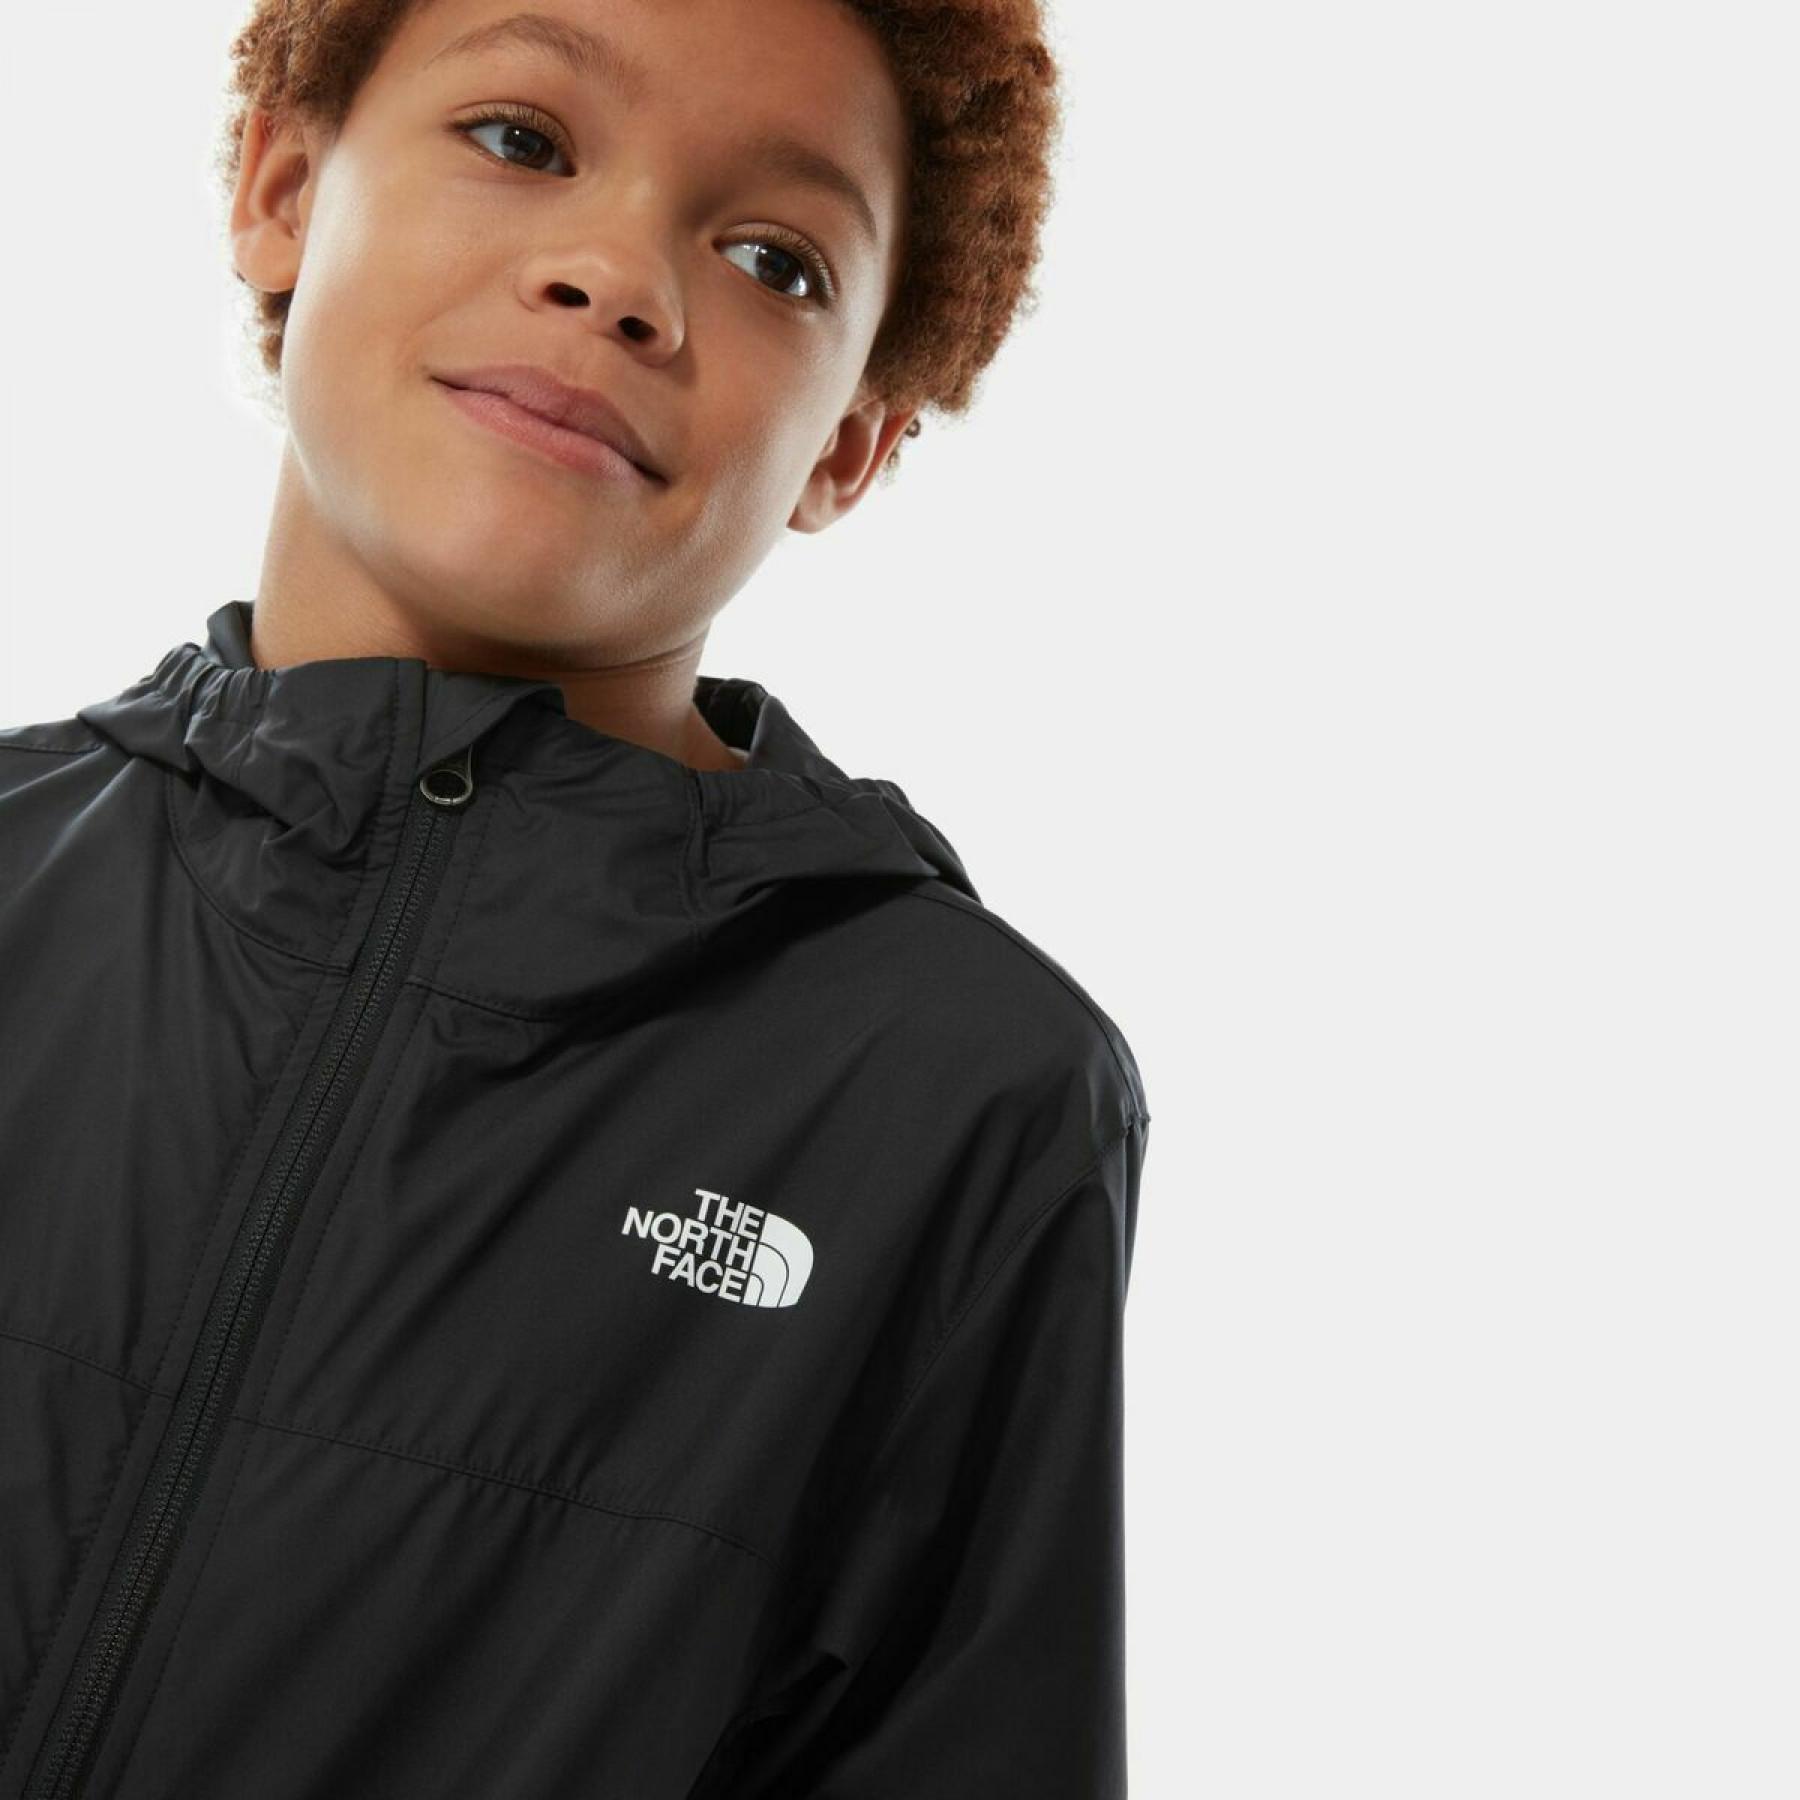 Children's jacket The North Face Reactor